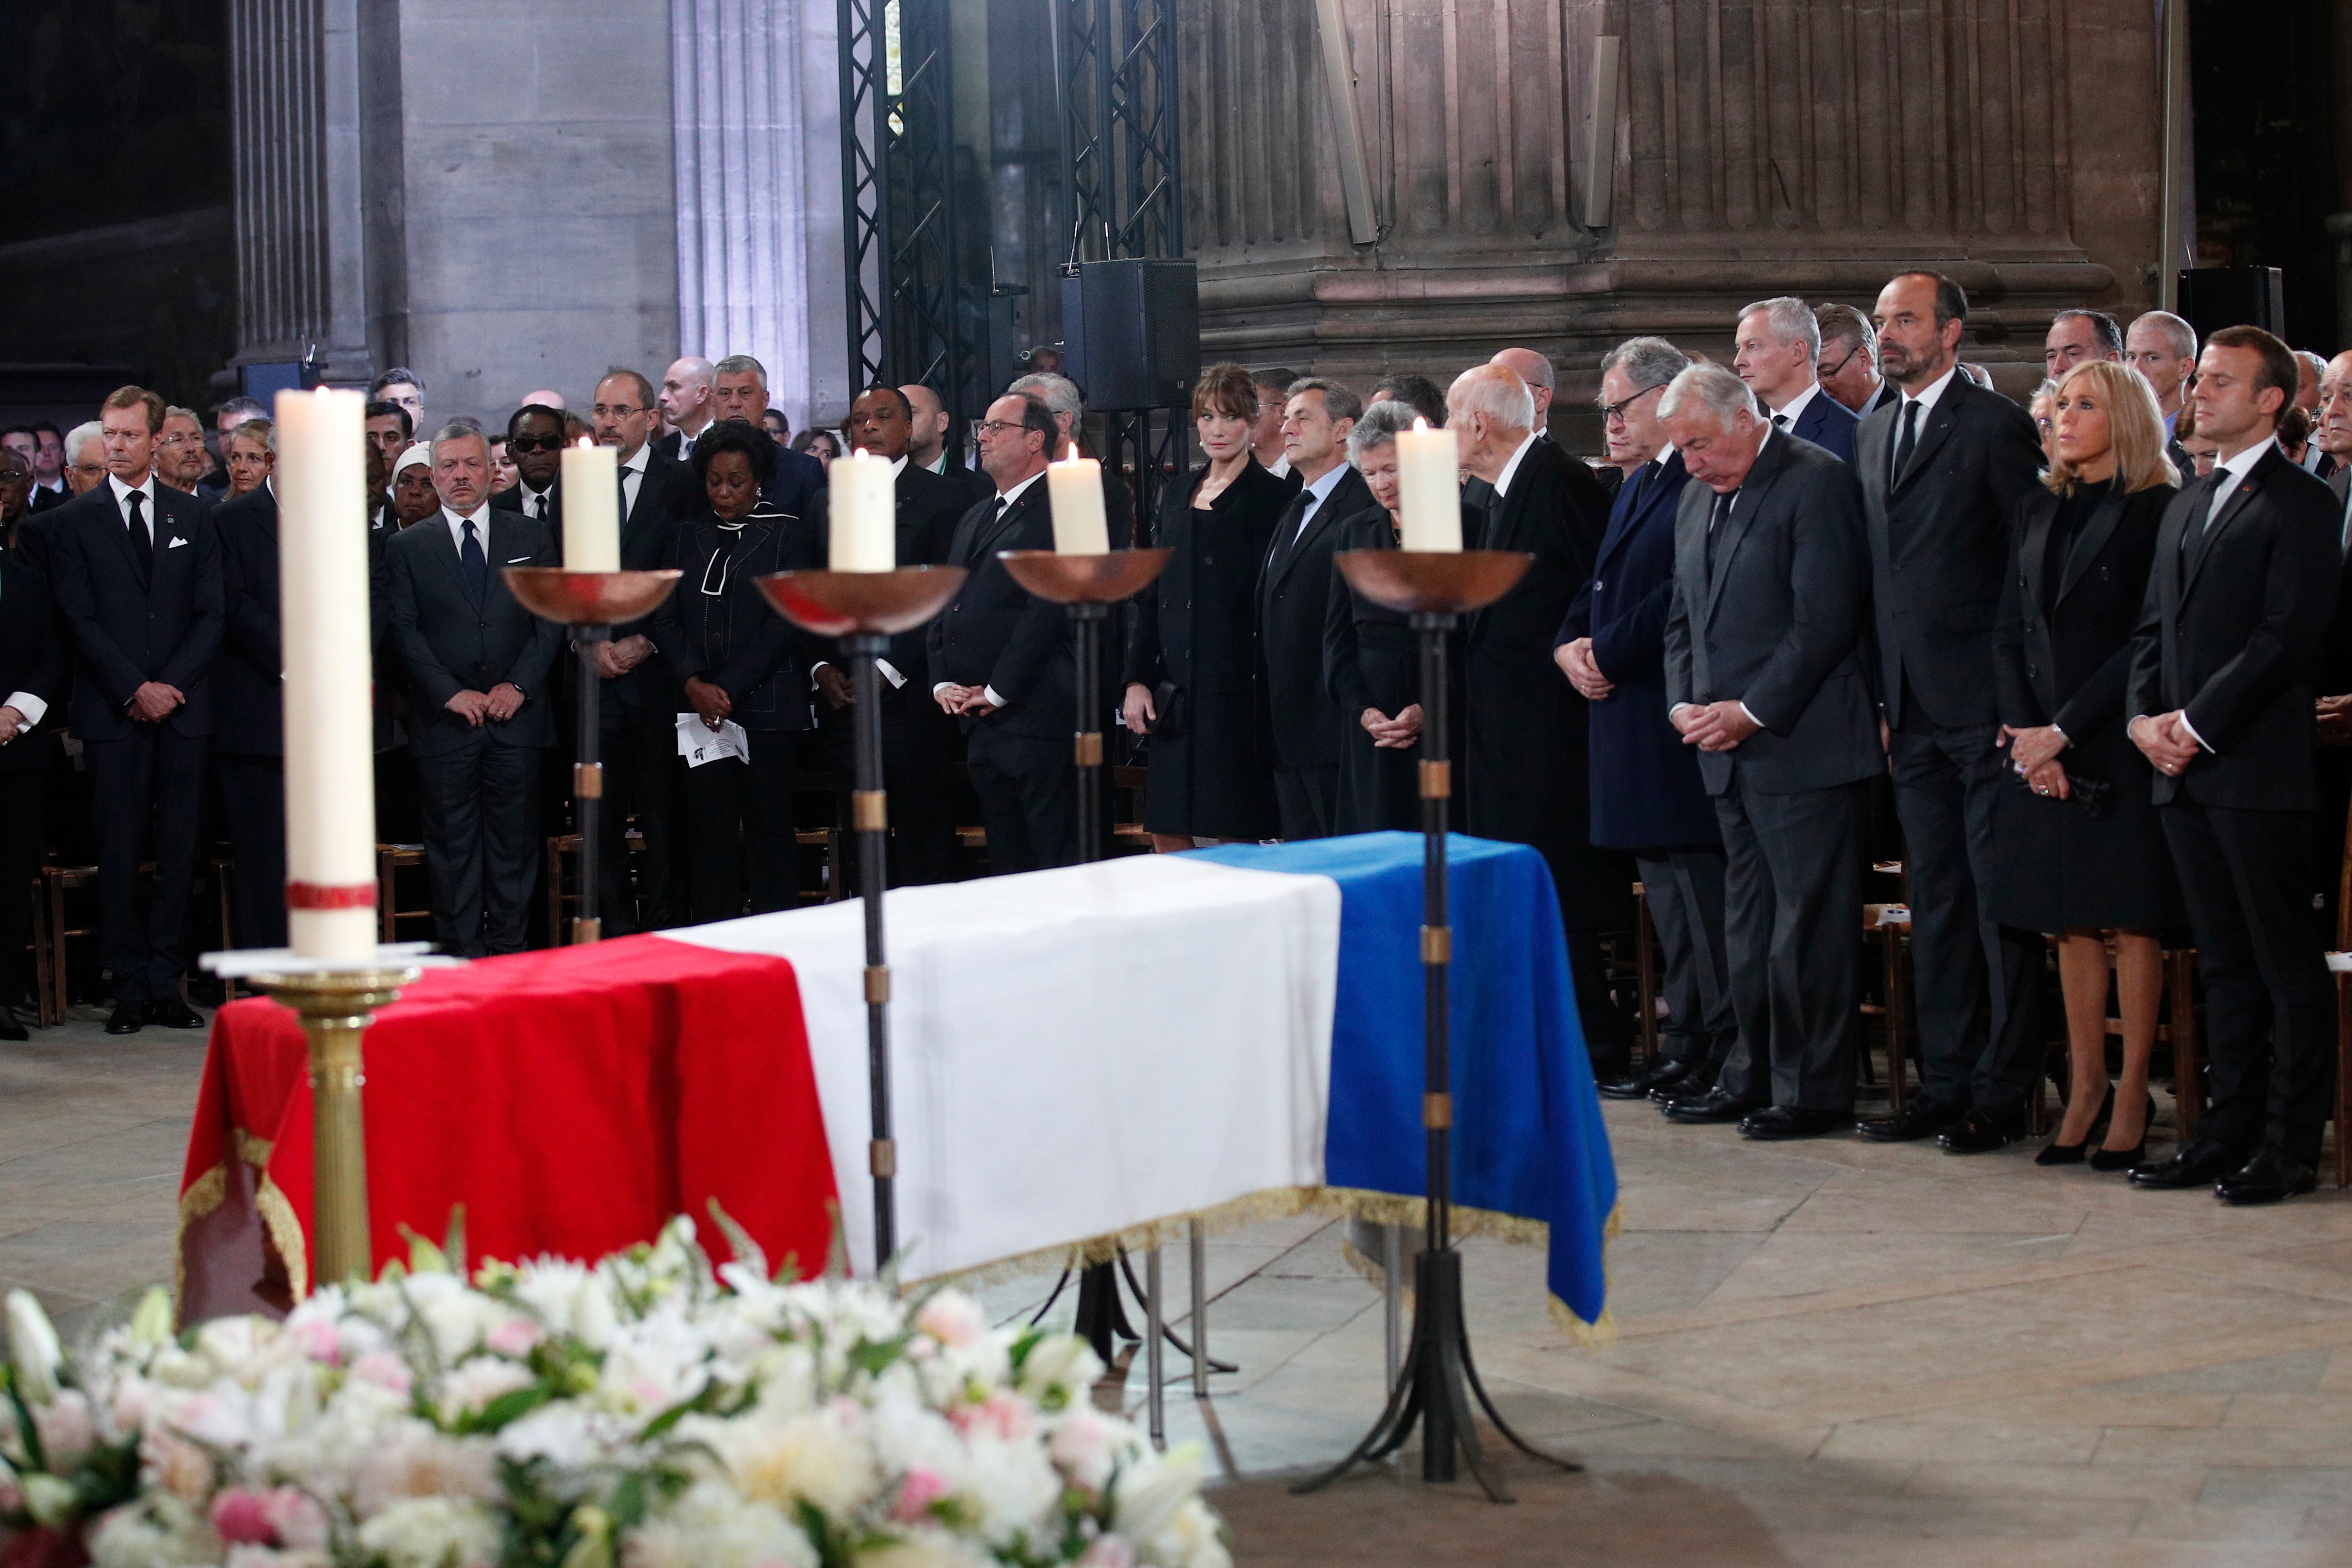 French President Emmanuel Macron (R) and his wife Brigitte (2-R), along with other French officials attend Jacques Chirac's funeral service.